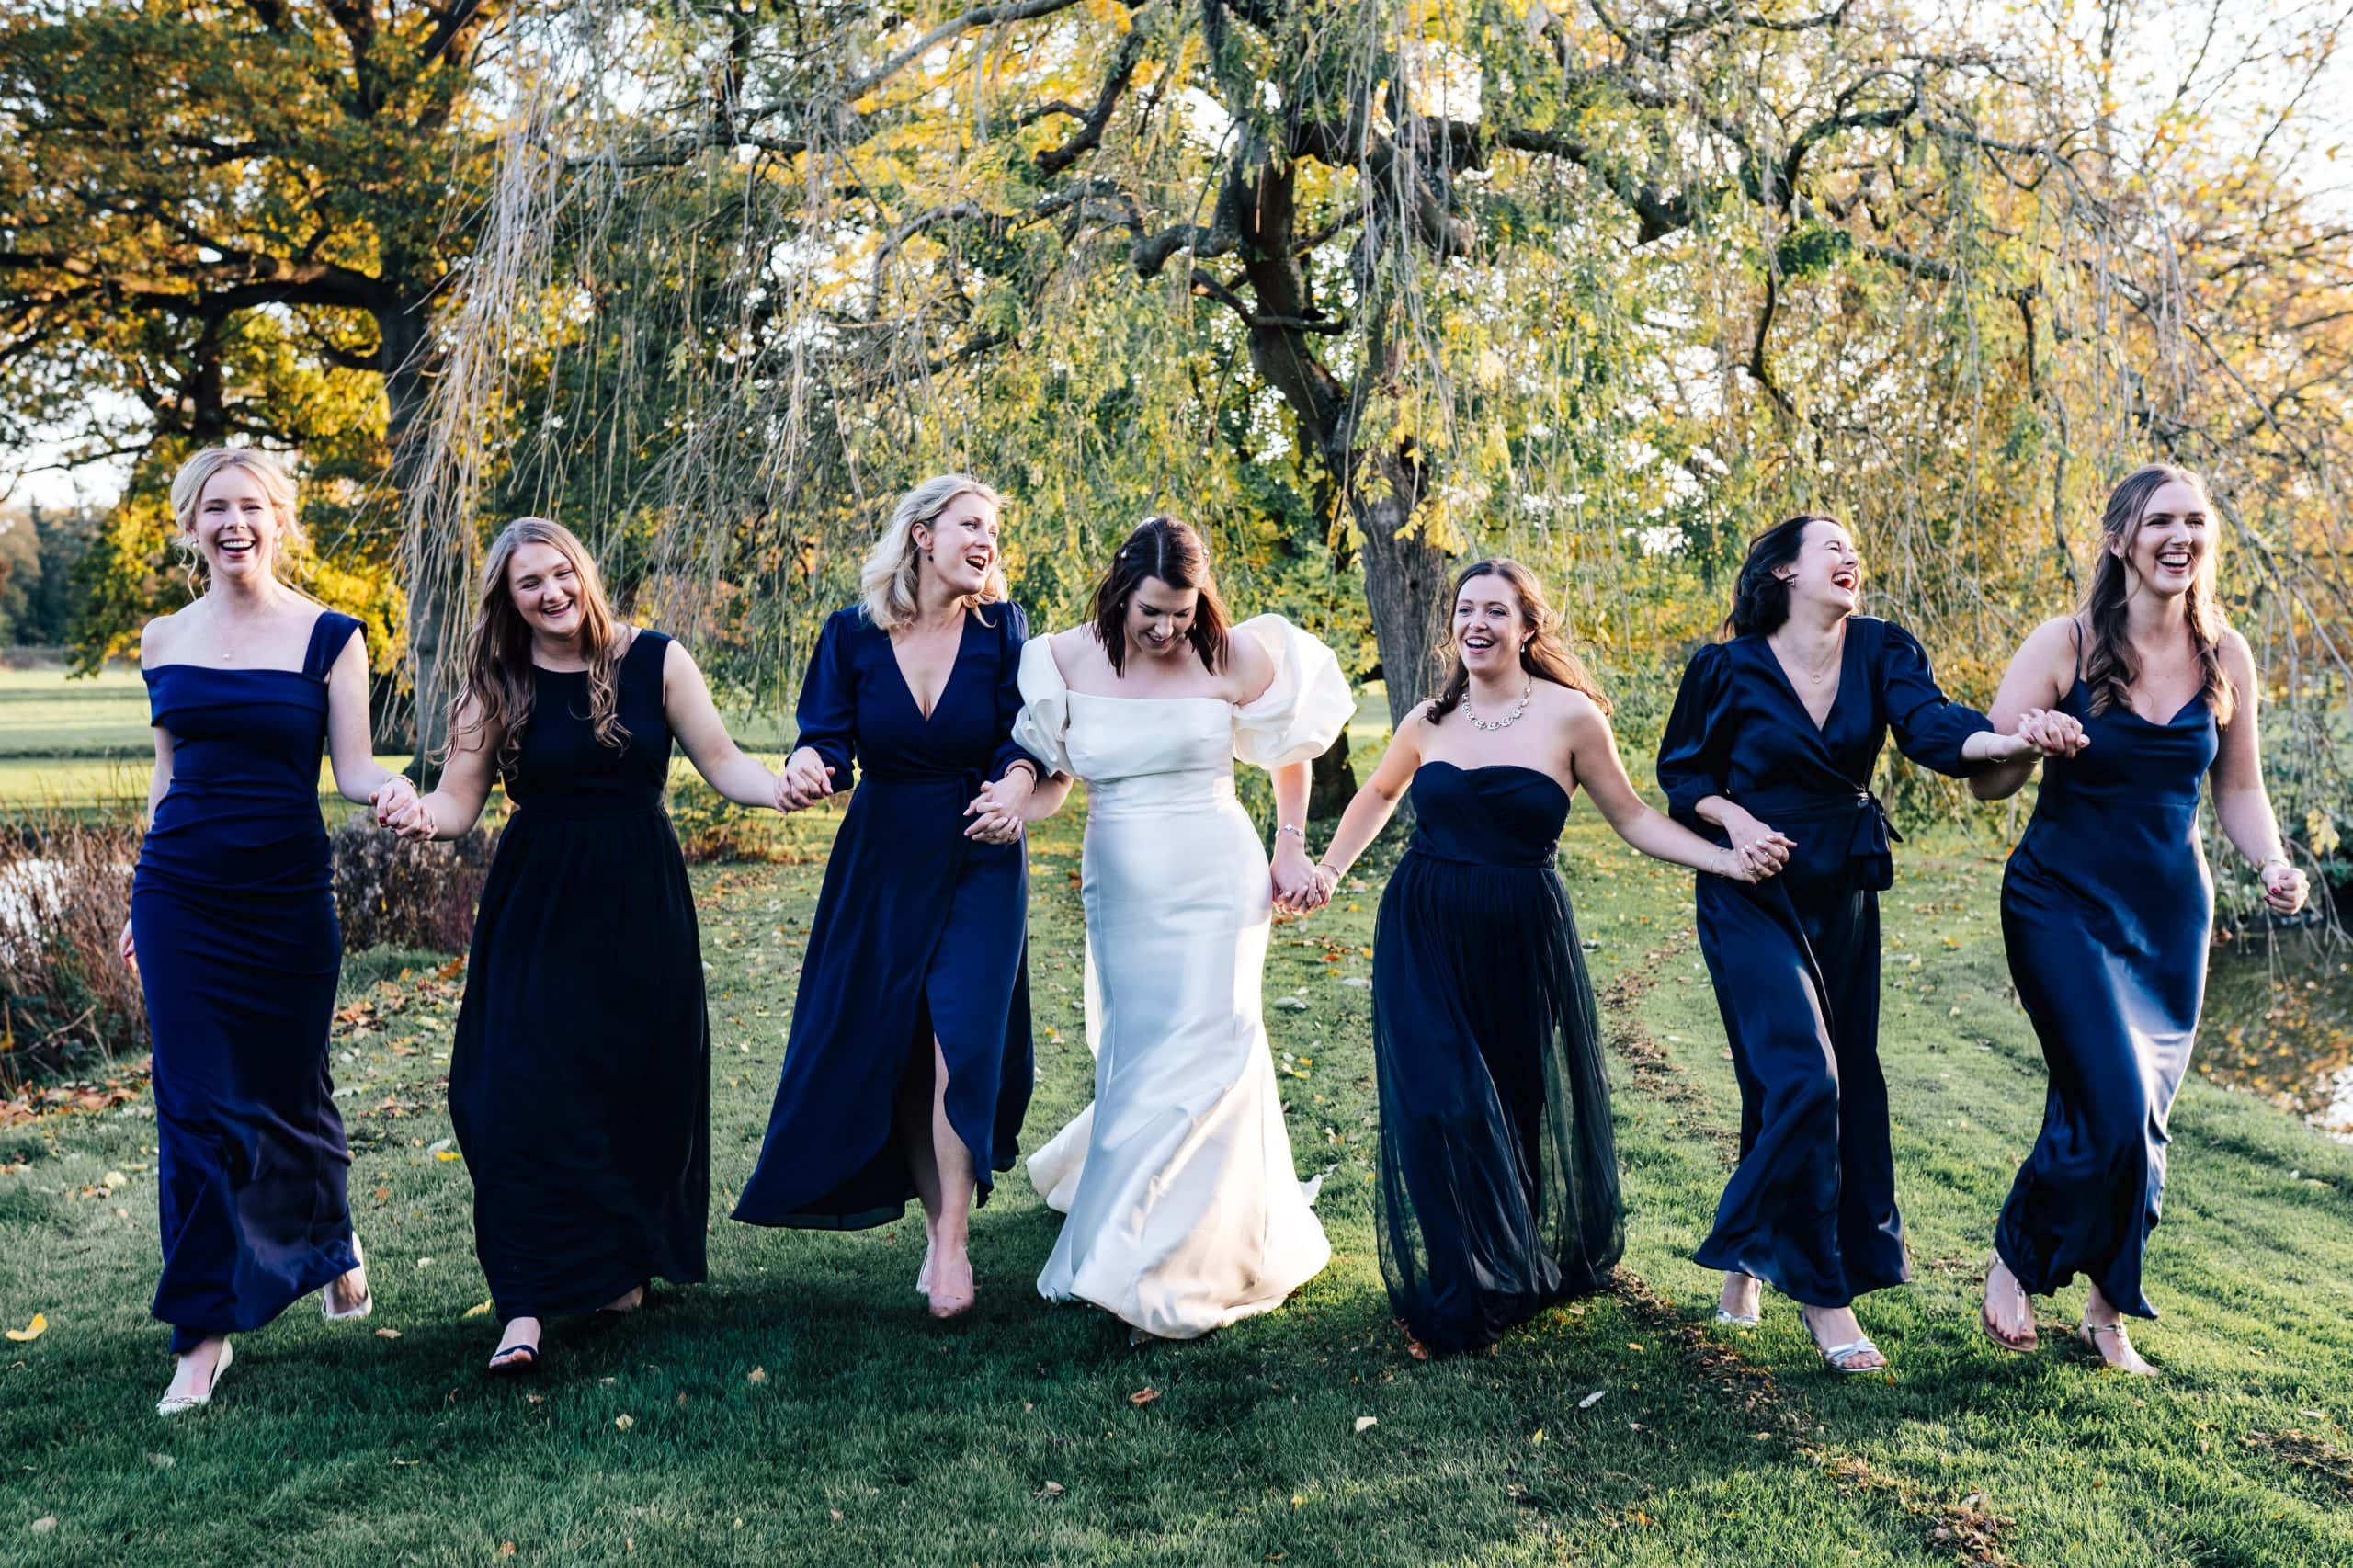 Bridal squad link arms, sing and walk towards the camera in a great effort for a group photo at Worcestershire wedding venue Birtsmorton Court